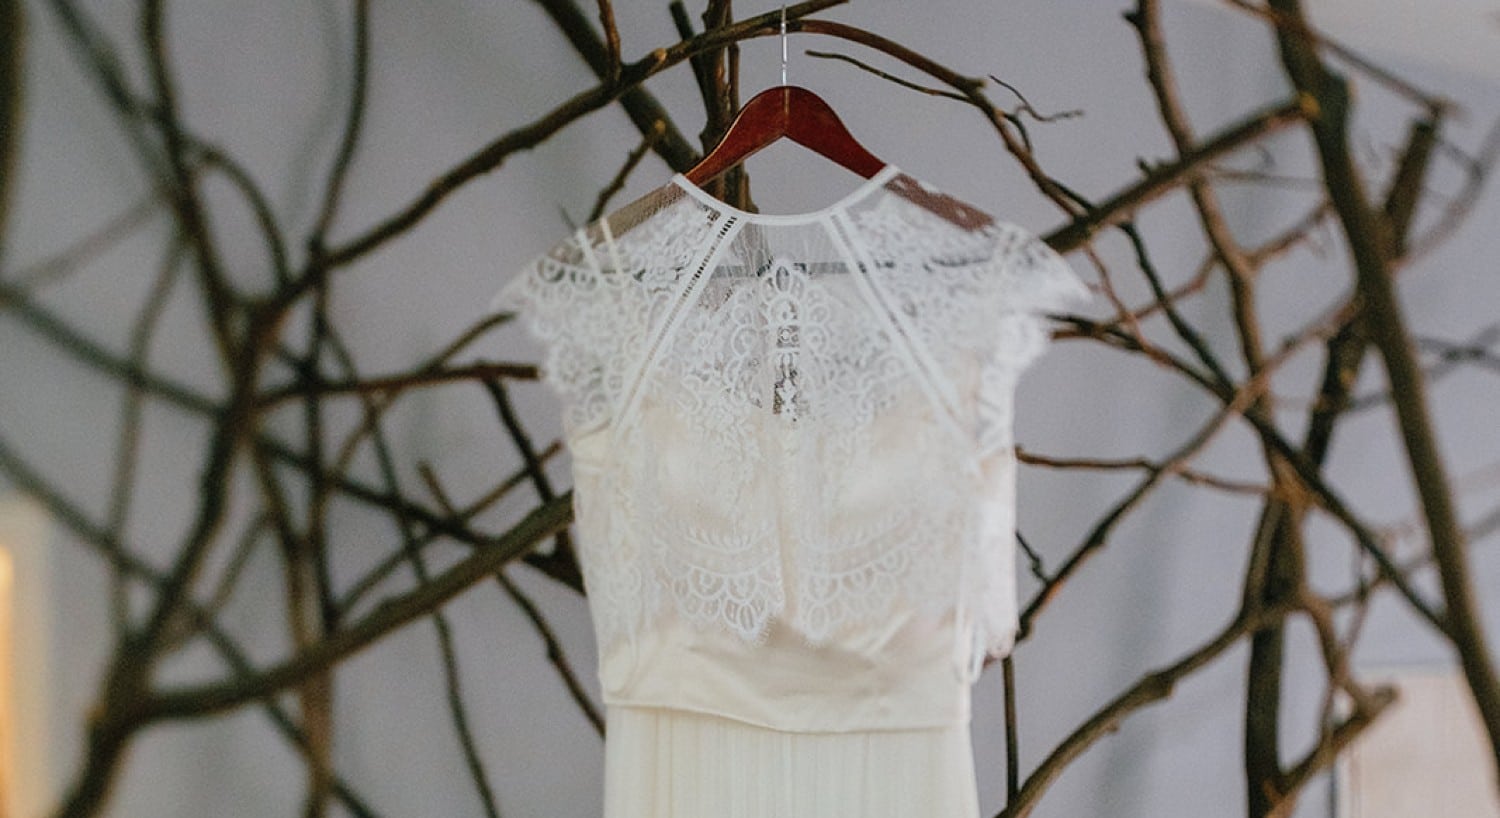 A gorgeous lace dress hanging on a wooden hanger with branches behind